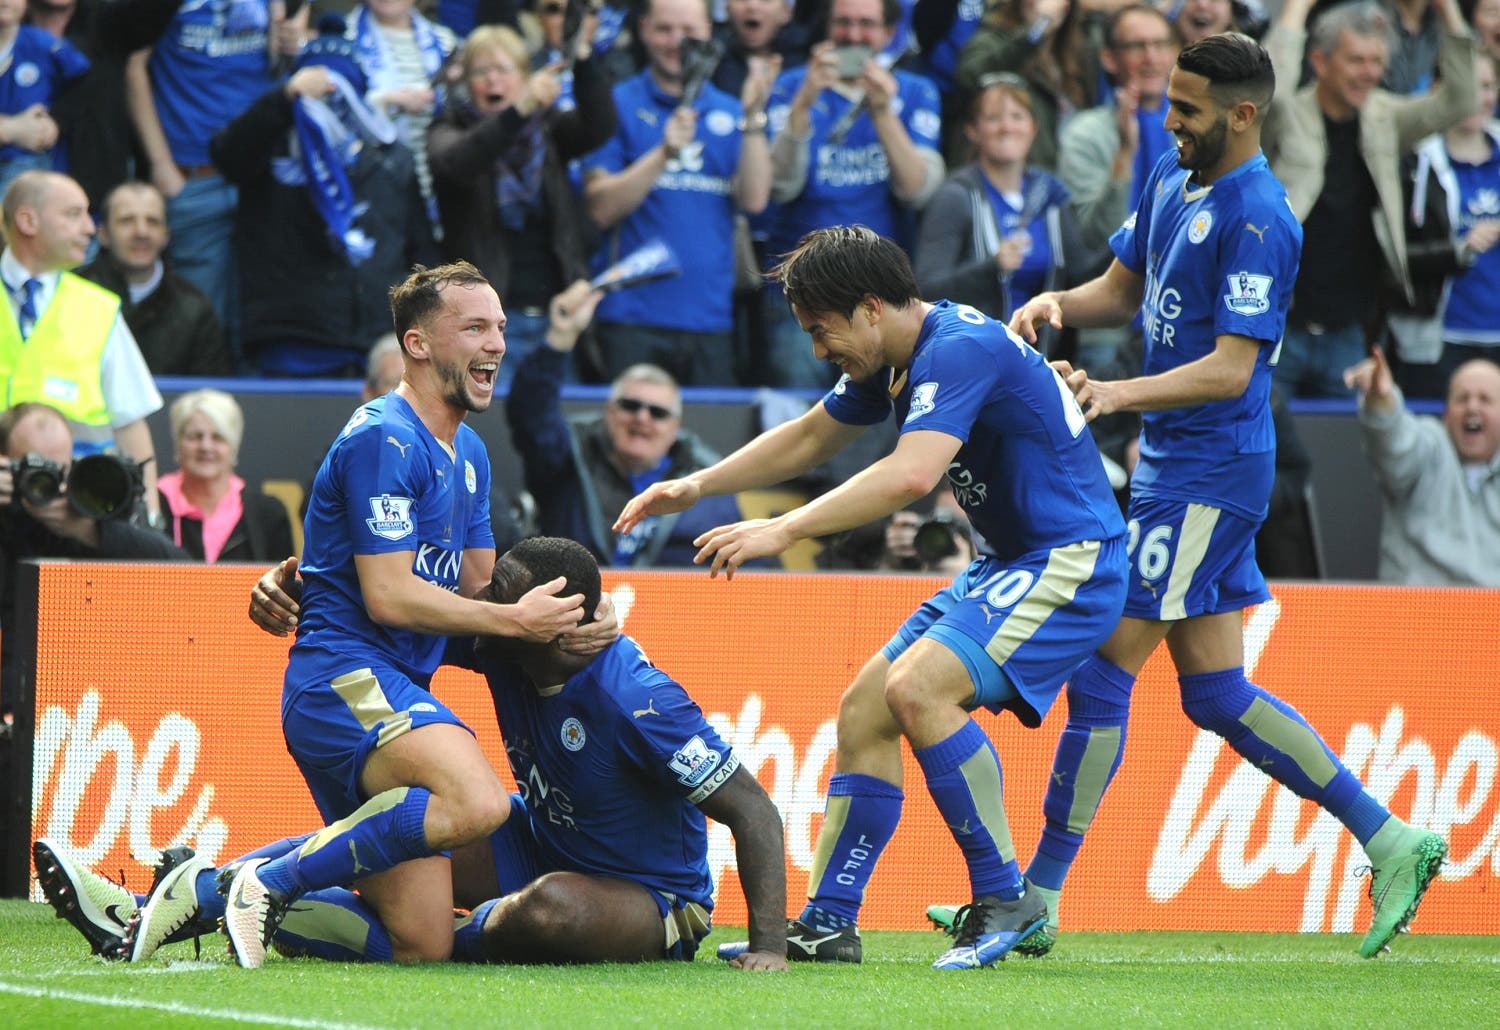 Leicester’s Wes Morgan, 2nd left, celebrates after scoring with Leicester’s Daniel Drinkwater, left, Leicester’s Shinji Okazaki, 2nd right, and Leicester’s Riyad Mahrez during the English Premier League soccer match between Leicester City and Southampton at the King Power Stadium in Leicester, England, Sunday, April 3, 2016. (AP)